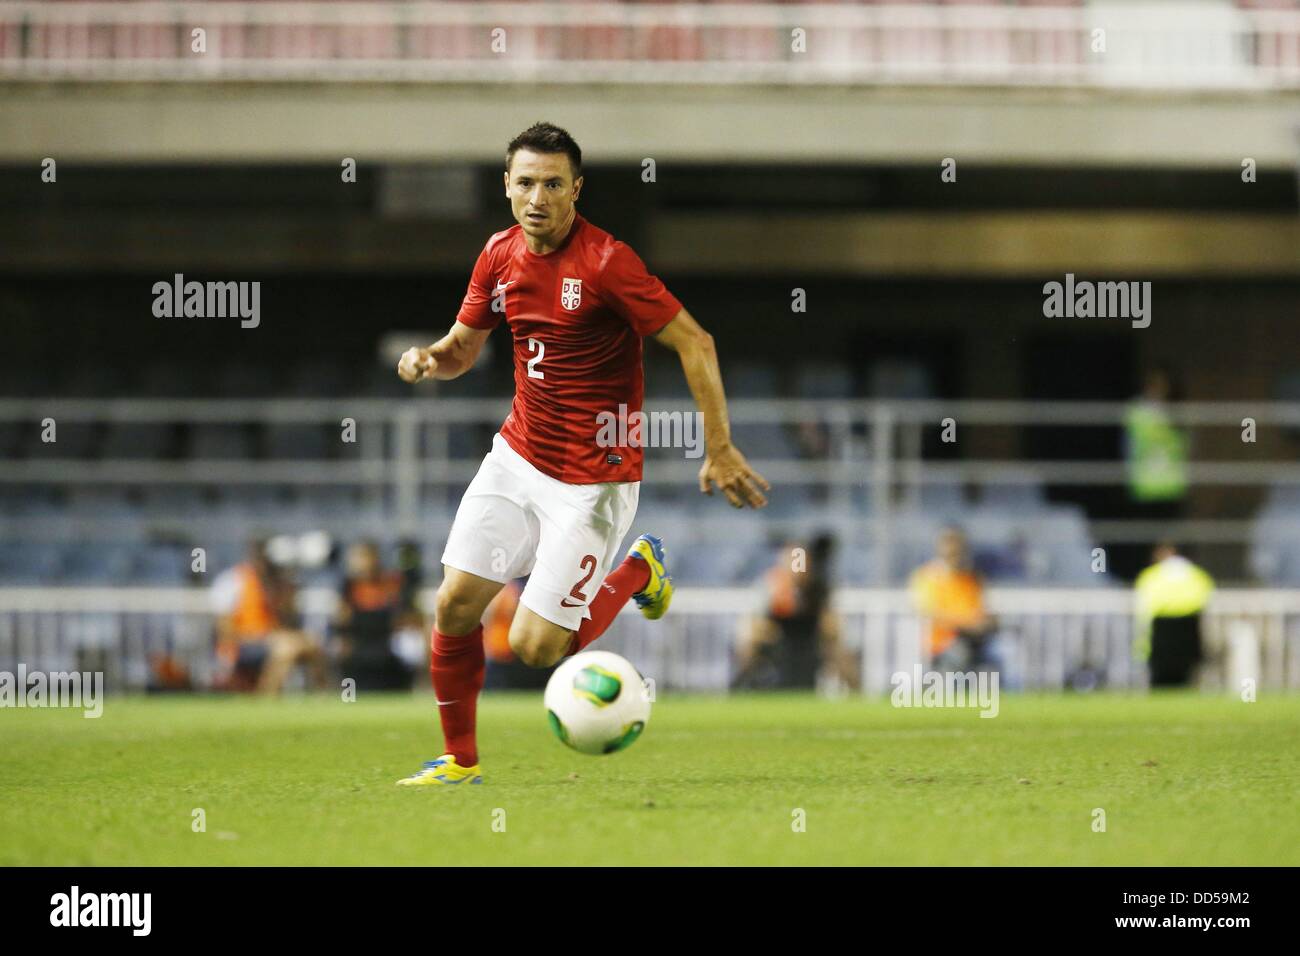 Antonio Rukavina (SRB), AUGUST 14, 2013 - Football / Soccer : International friendly match between Colombia and Serbia, at the Mini Estadi, Barcelona, Spain, August 14, 2013. (Photo by AFLO) Stock Photo